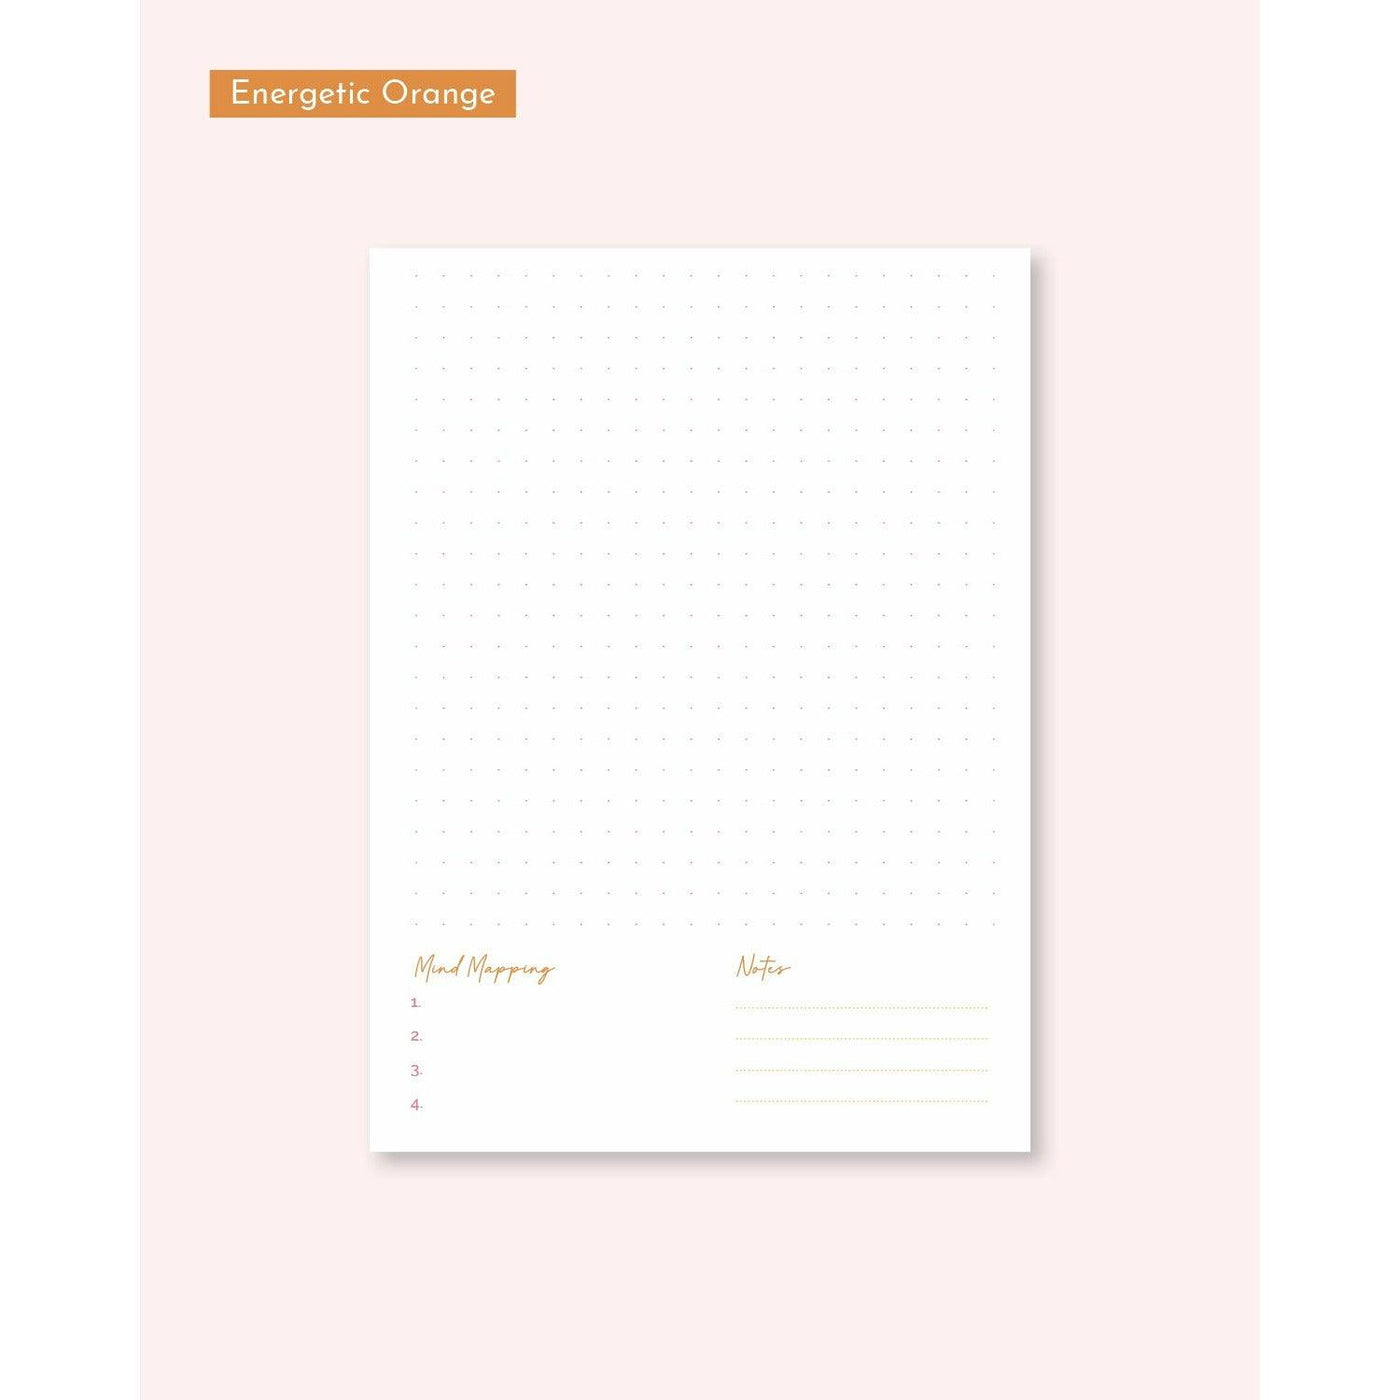 DAILY PLANNER INSERT - CLASSIC SIZE - QUARTERLY SUPPLY by Rongrong DeVoe- Energetic Orange Note Page